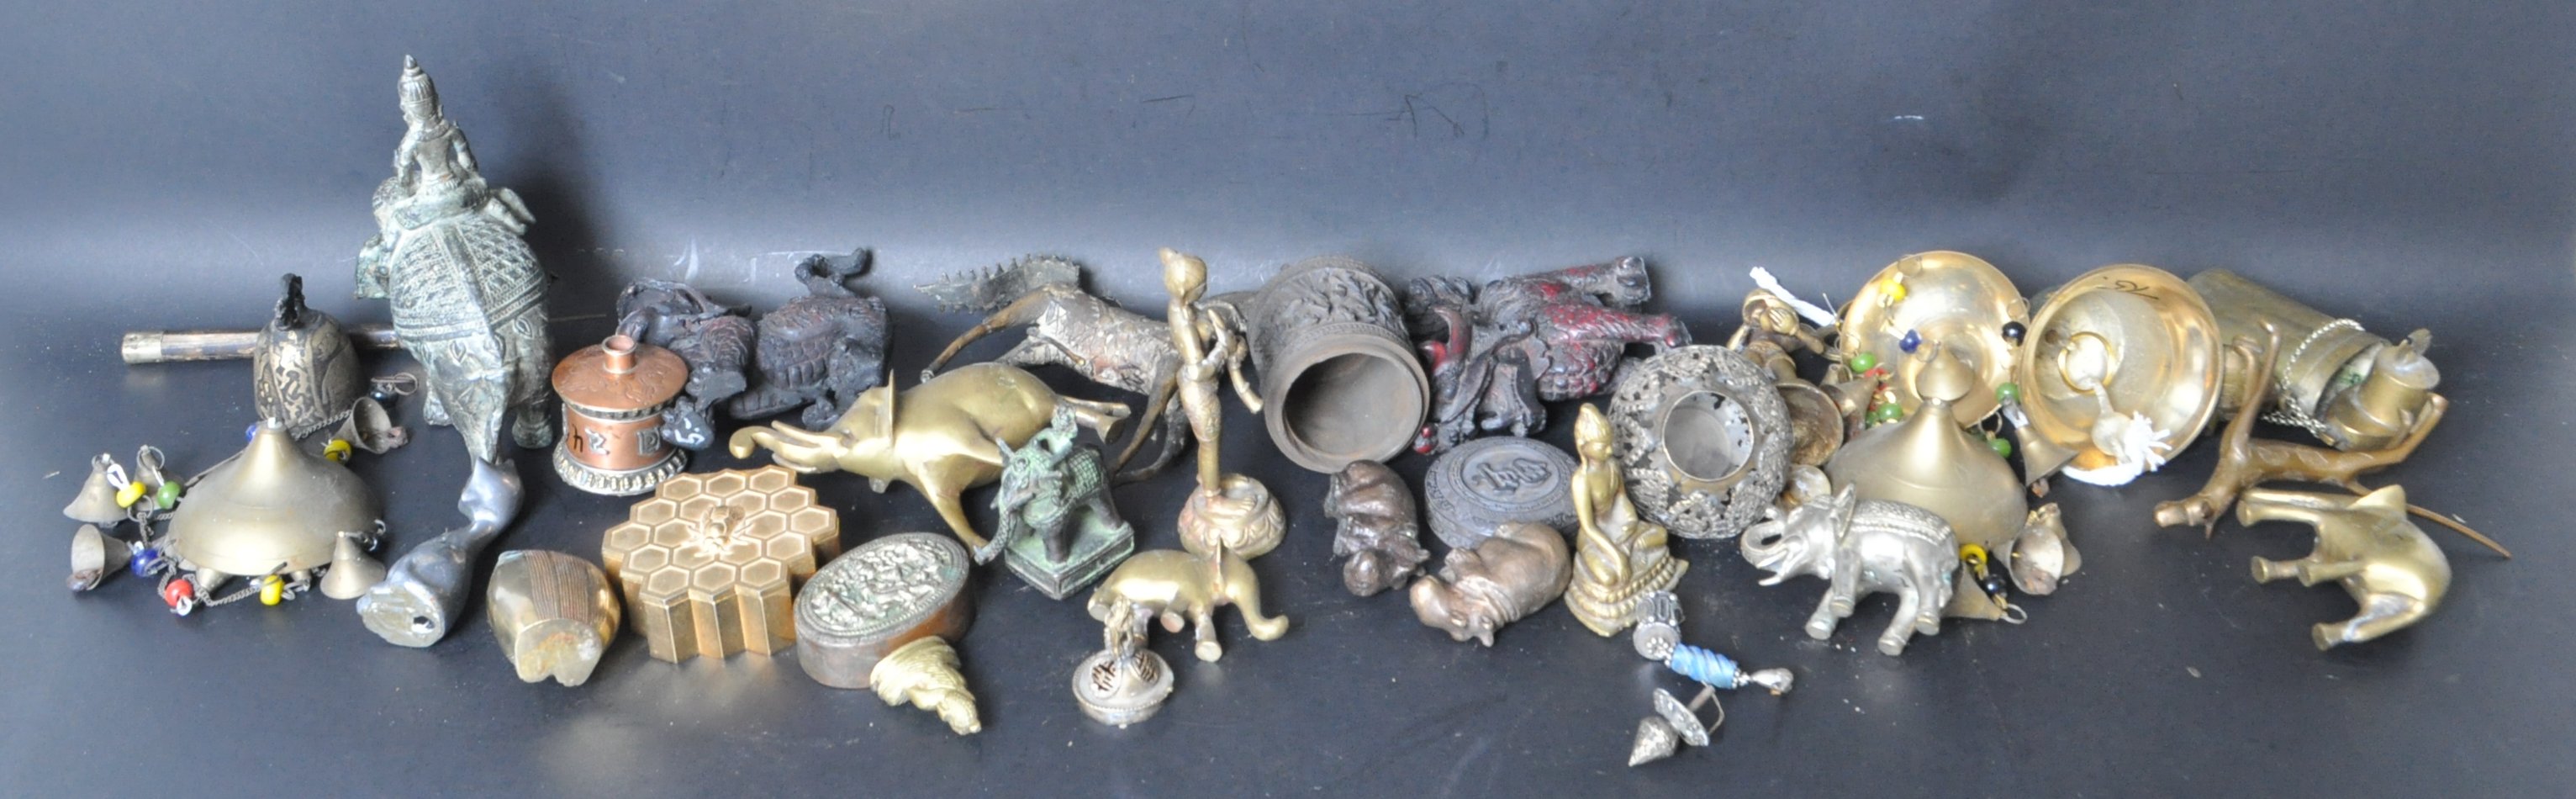 LARGE COLLECTION OF BRASS WARE AND HINDU FIGURINES - Image 8 of 9